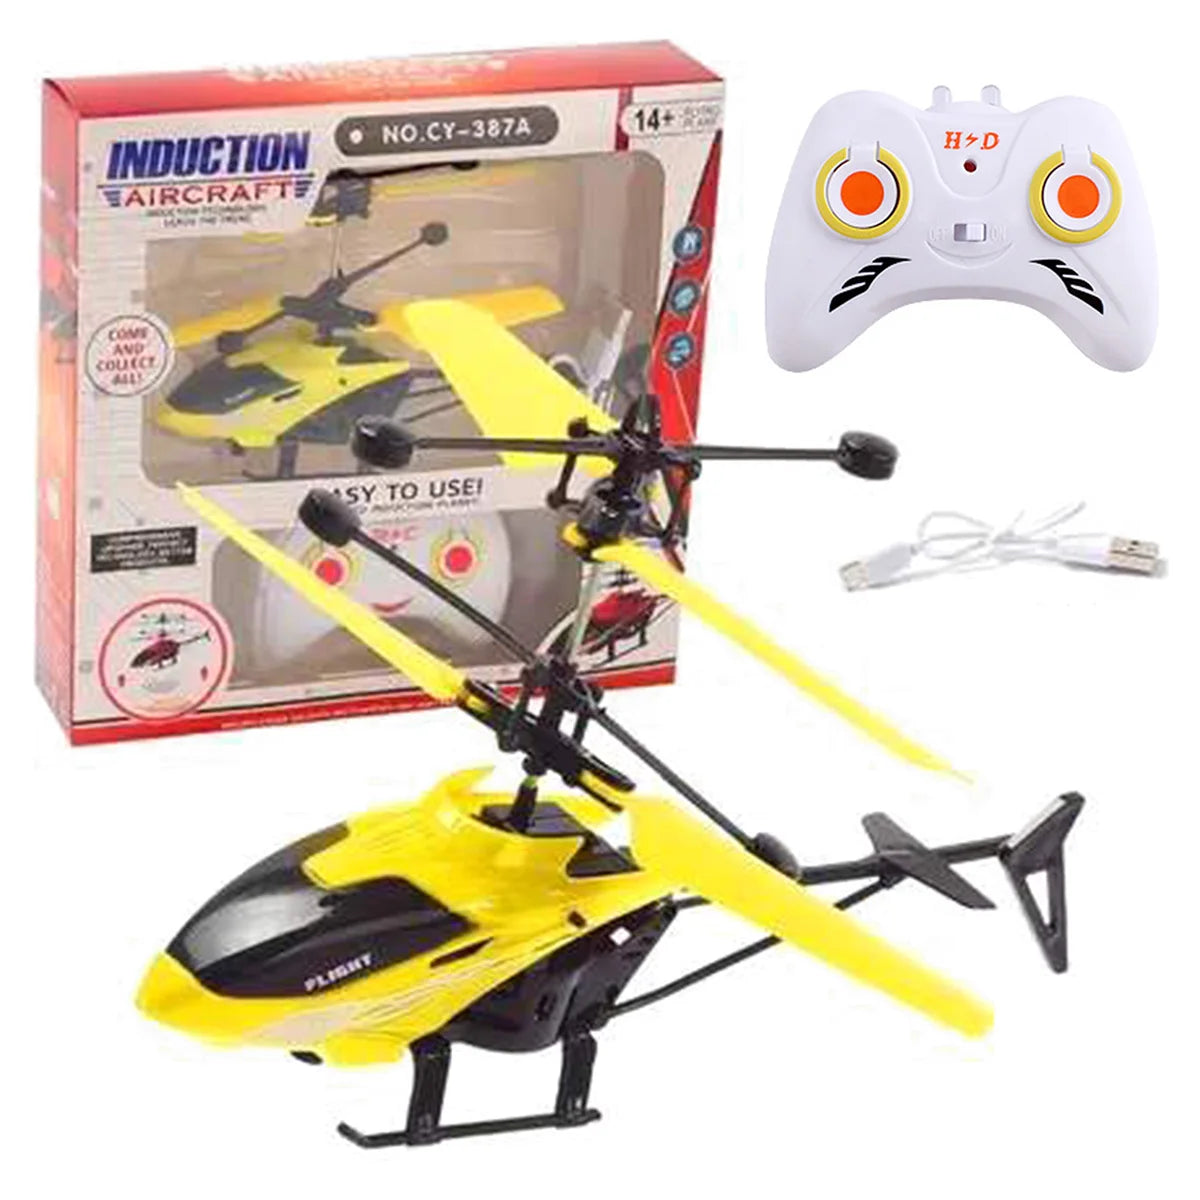 CY-38 Rc Helicopter, UsEi : cy-3874 Hz D INDUCTION 